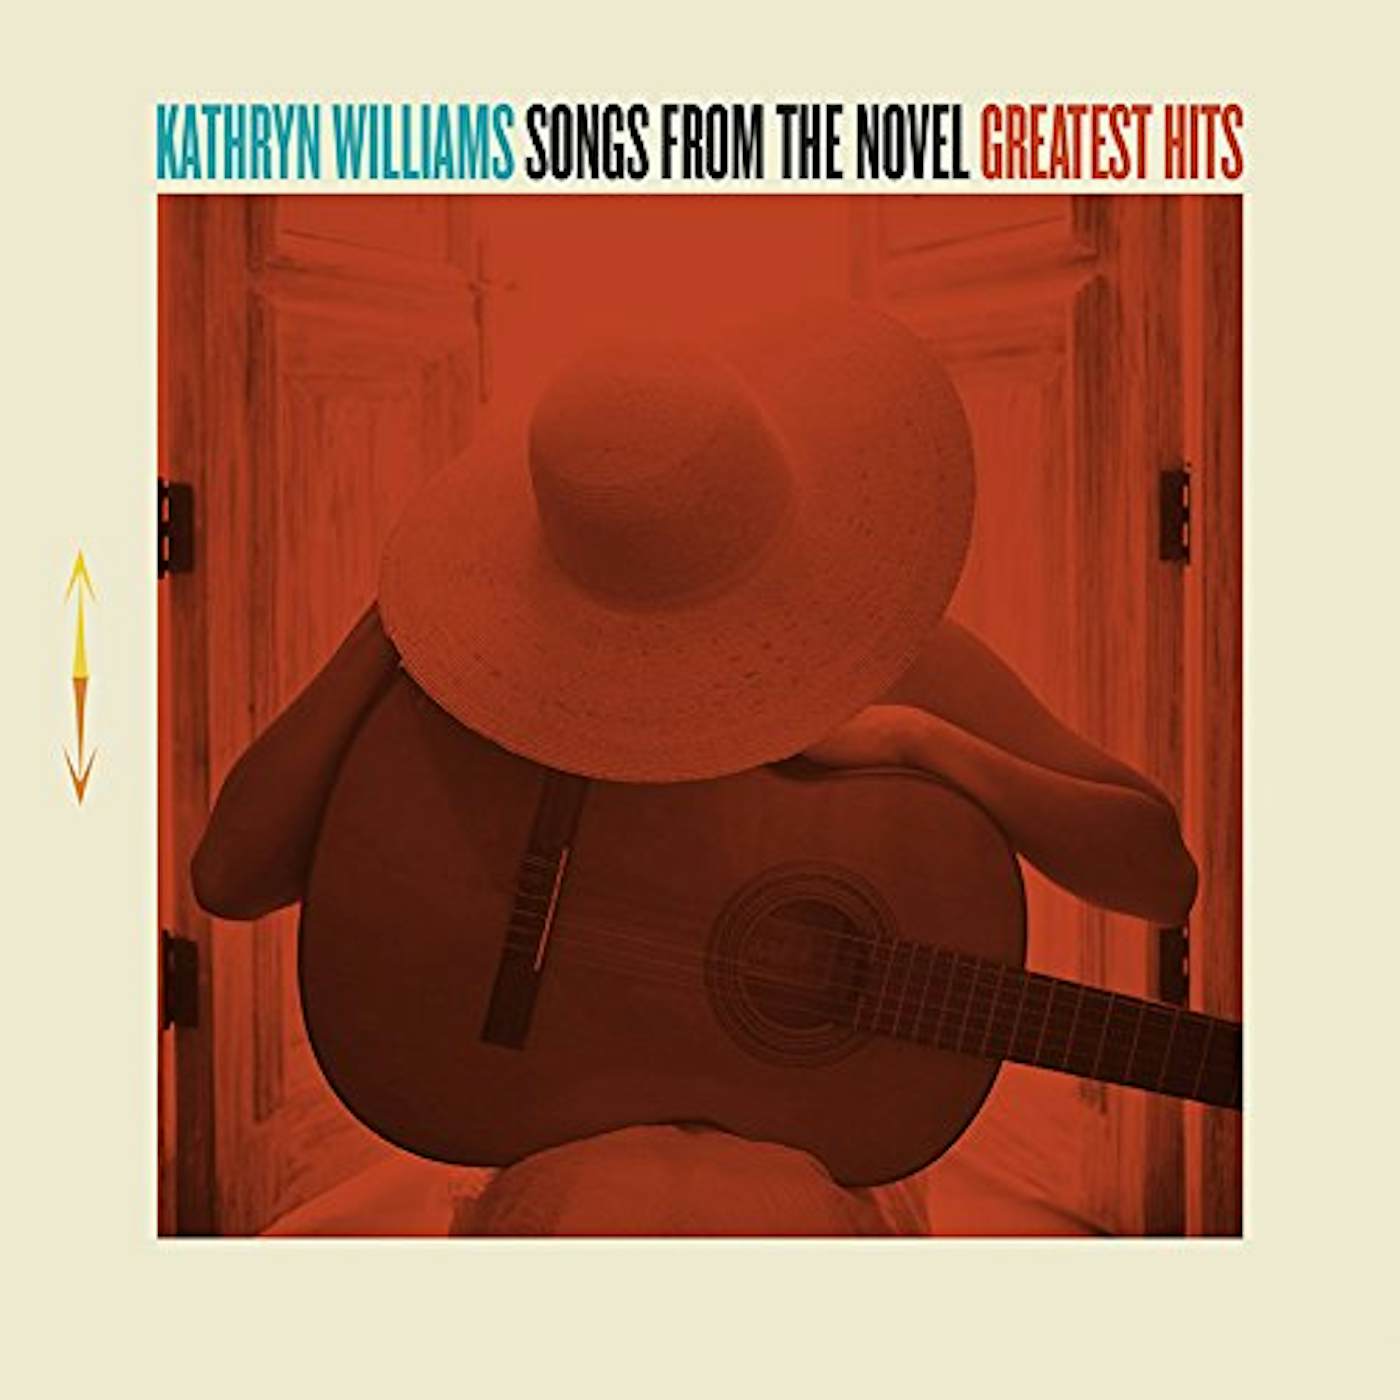 Kathryn Williams SONGS FROM THE NOVEL GREATEST HITS CD